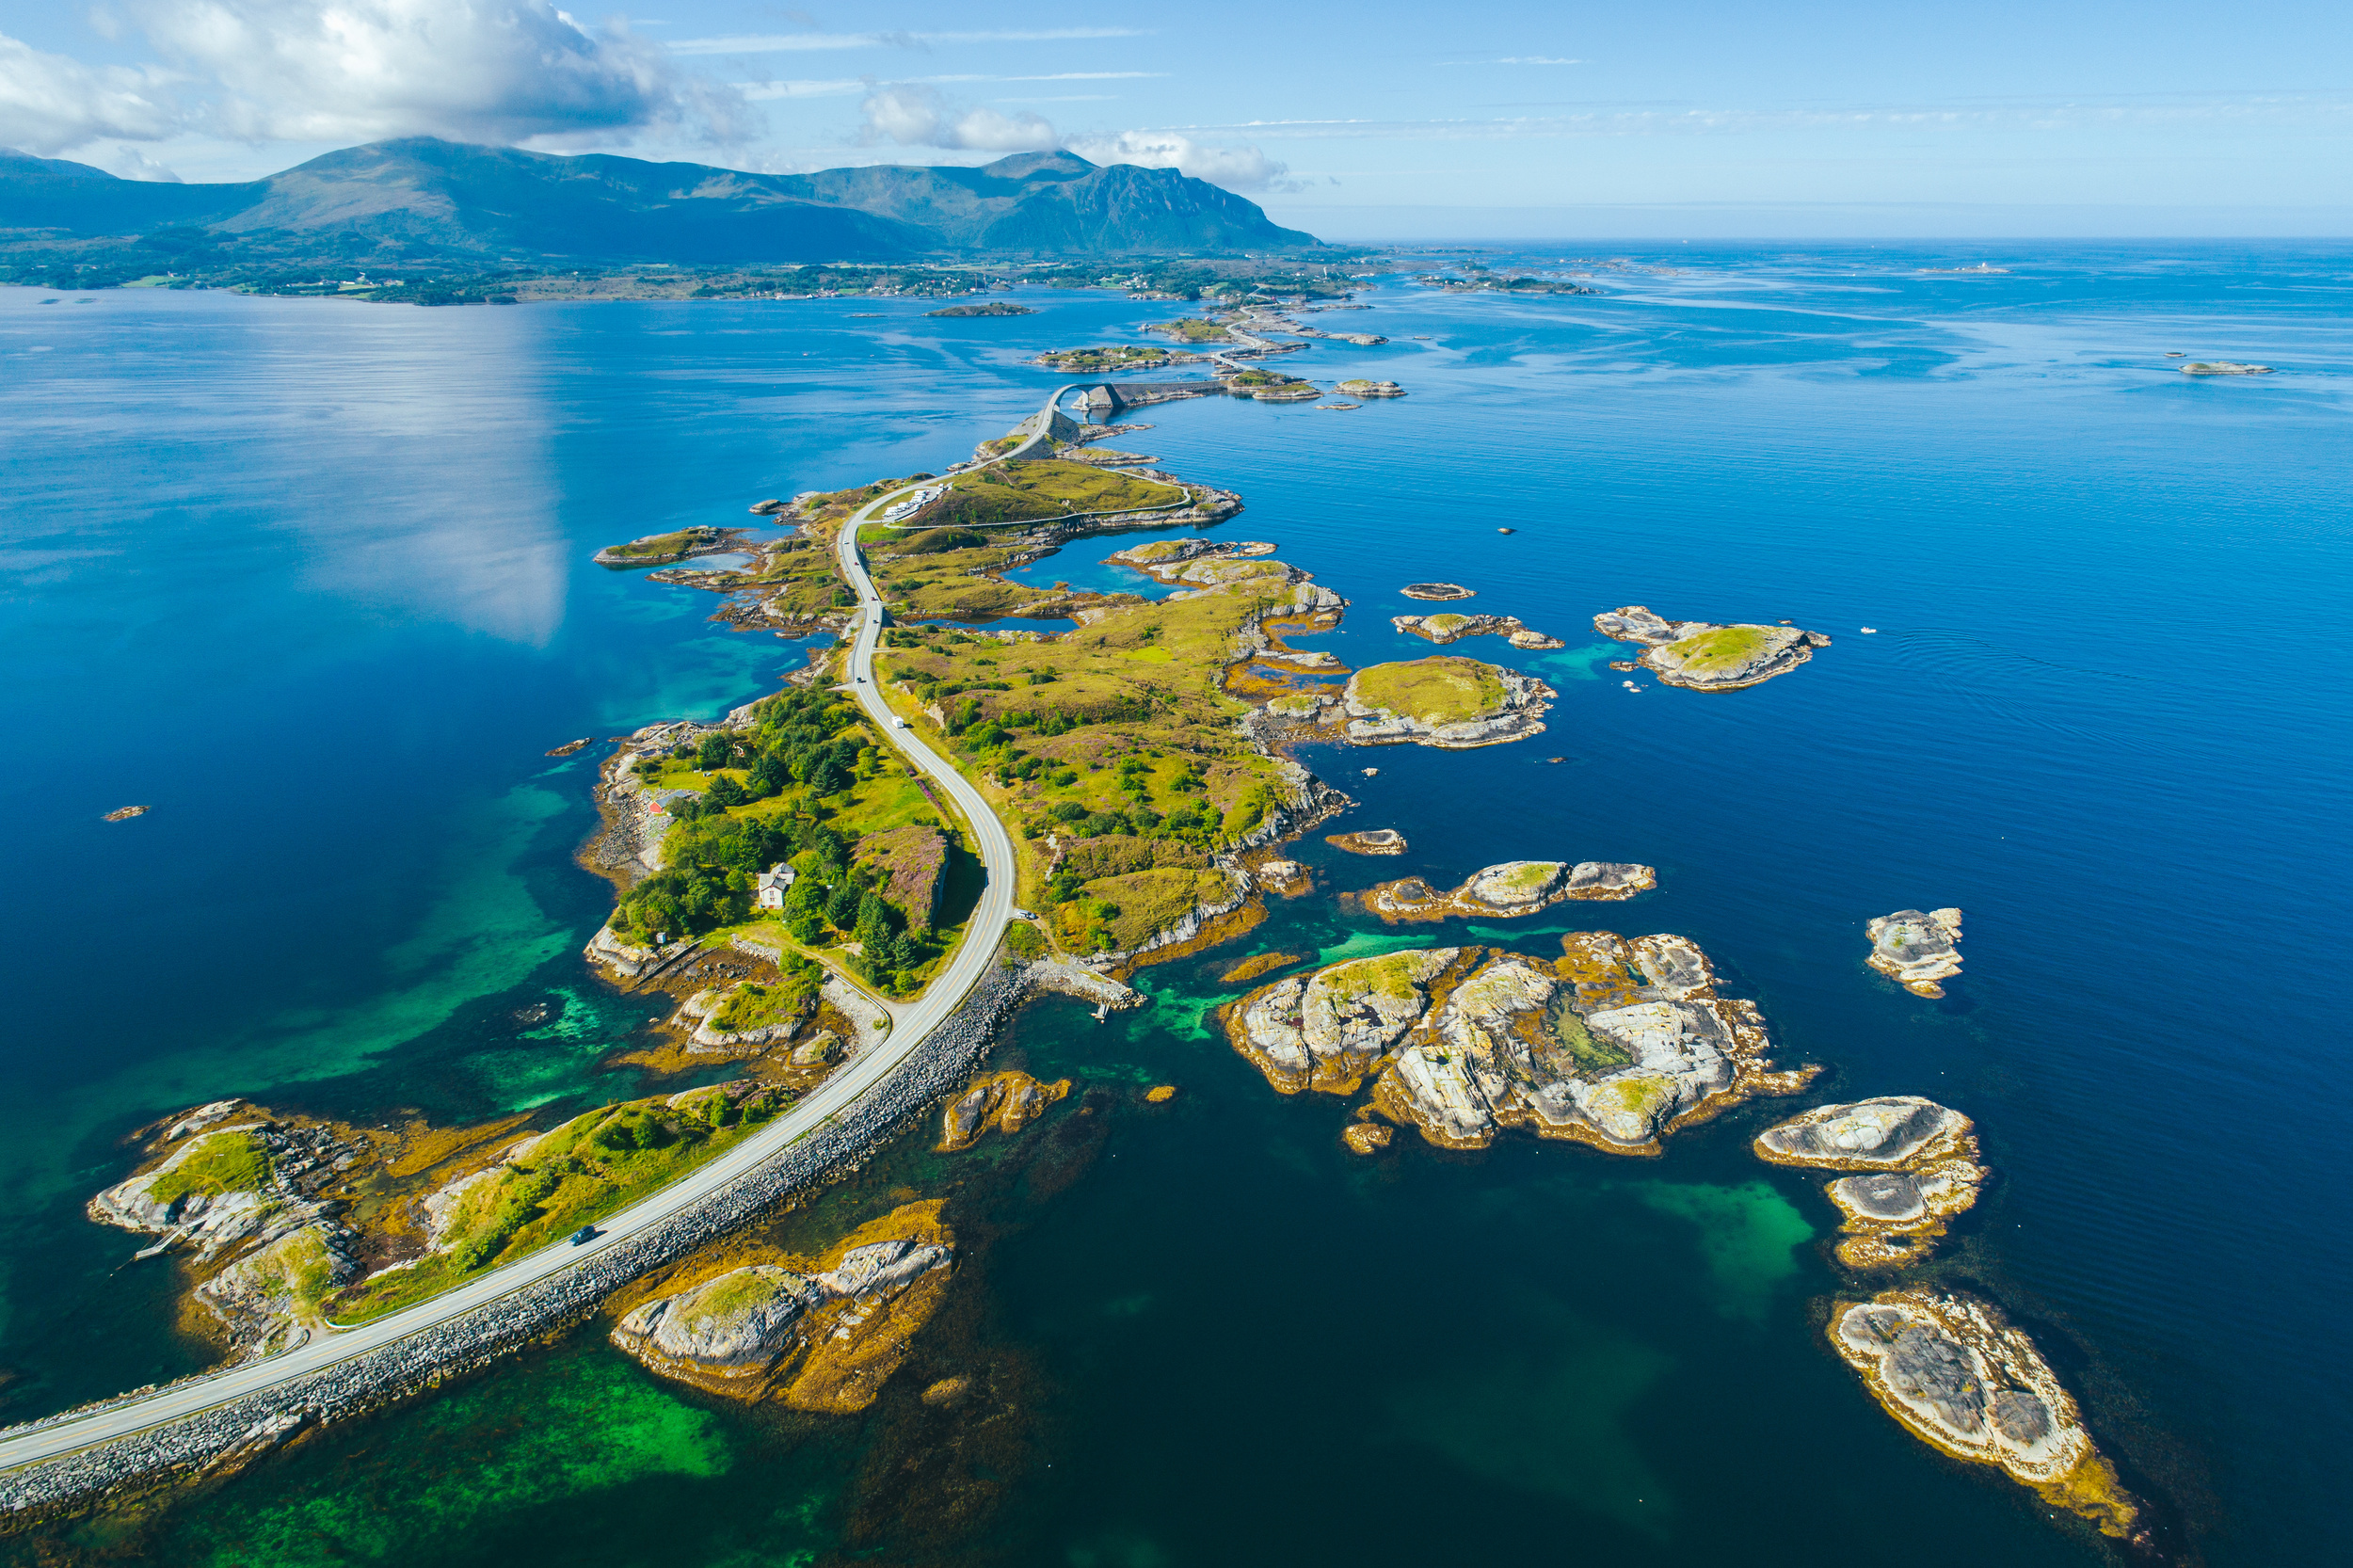 <p>This beautiful drive along the Atlantic Ocean in Norway is great if you’re not looking for a major road trip. It’s only a few miles long but crosses bridges with the ocean on either side and has amazing views of fjords and mountains.</p><p>You may also like: <a href='https://www.yardbarker.com/lifestyle/articles/the_14_most_beautiful_beach_towns_on_the_west_coast_021824/s1__38578337'>The 14 most beautiful beach towns on the West Coast</a></p>